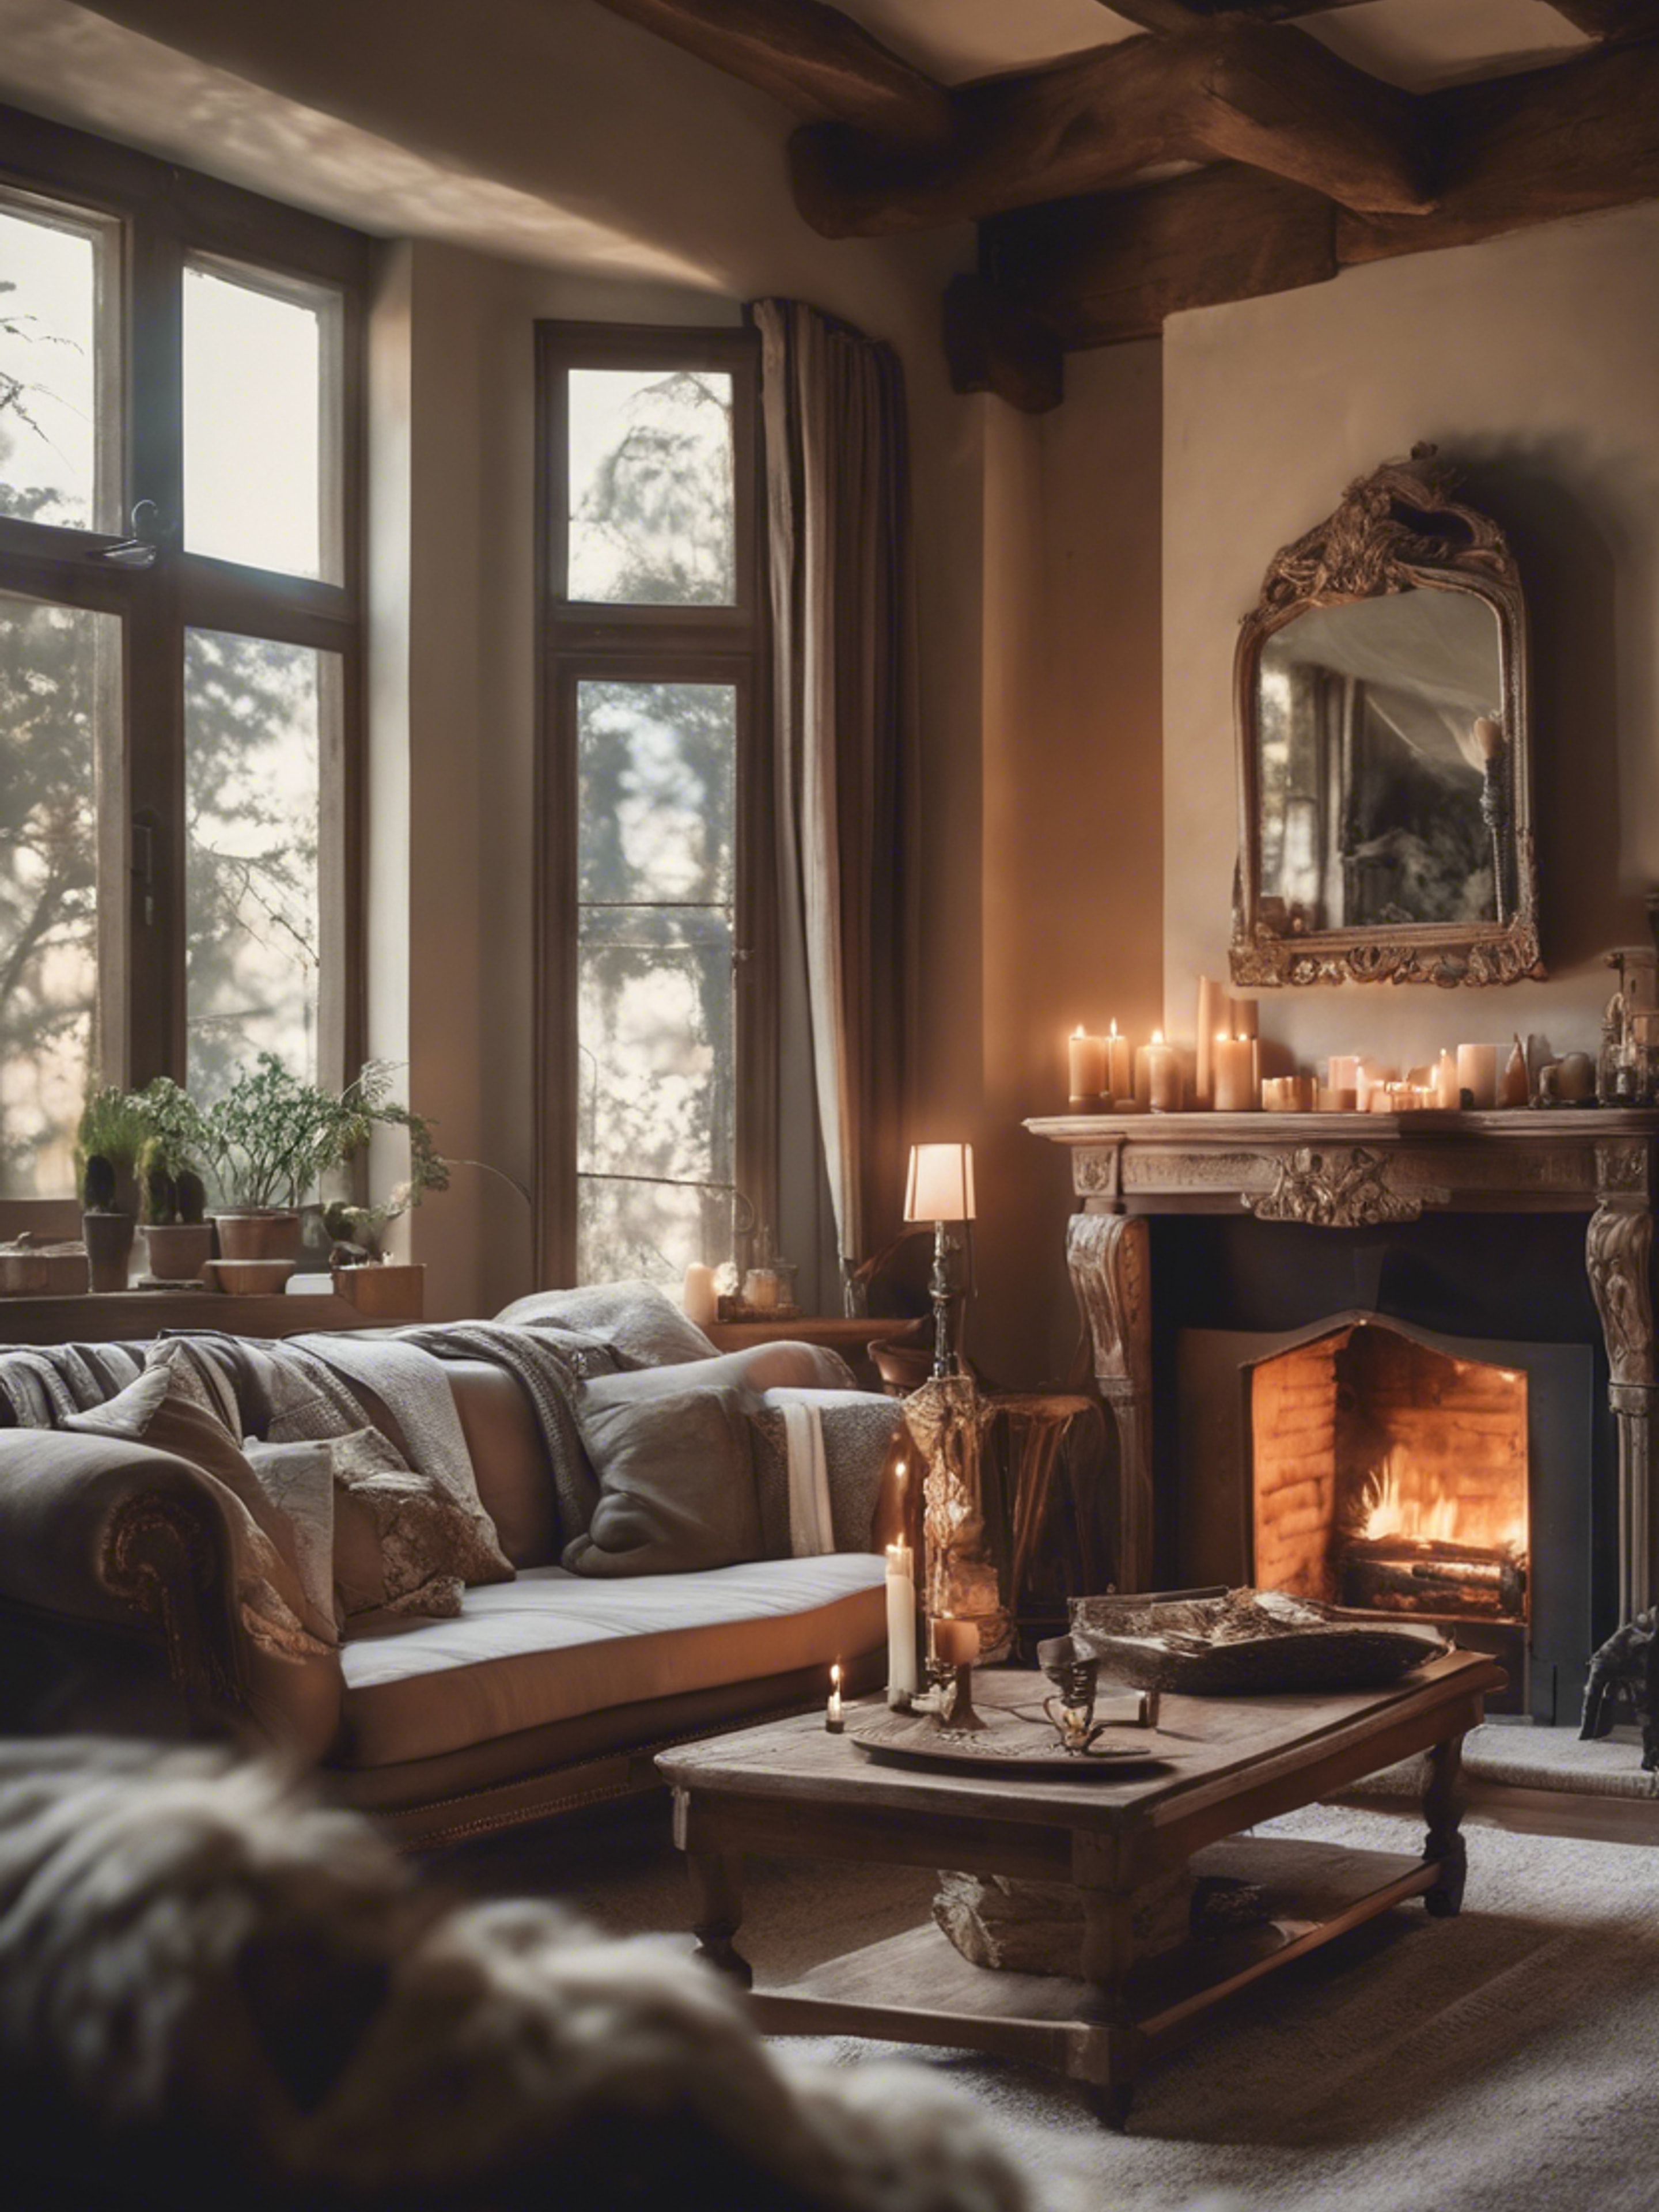 A French country style living room, cozy and comfortable with a roaring fireplace, antique furniture, and soft candlelight. Тапет[b1f658778f85425ba676]